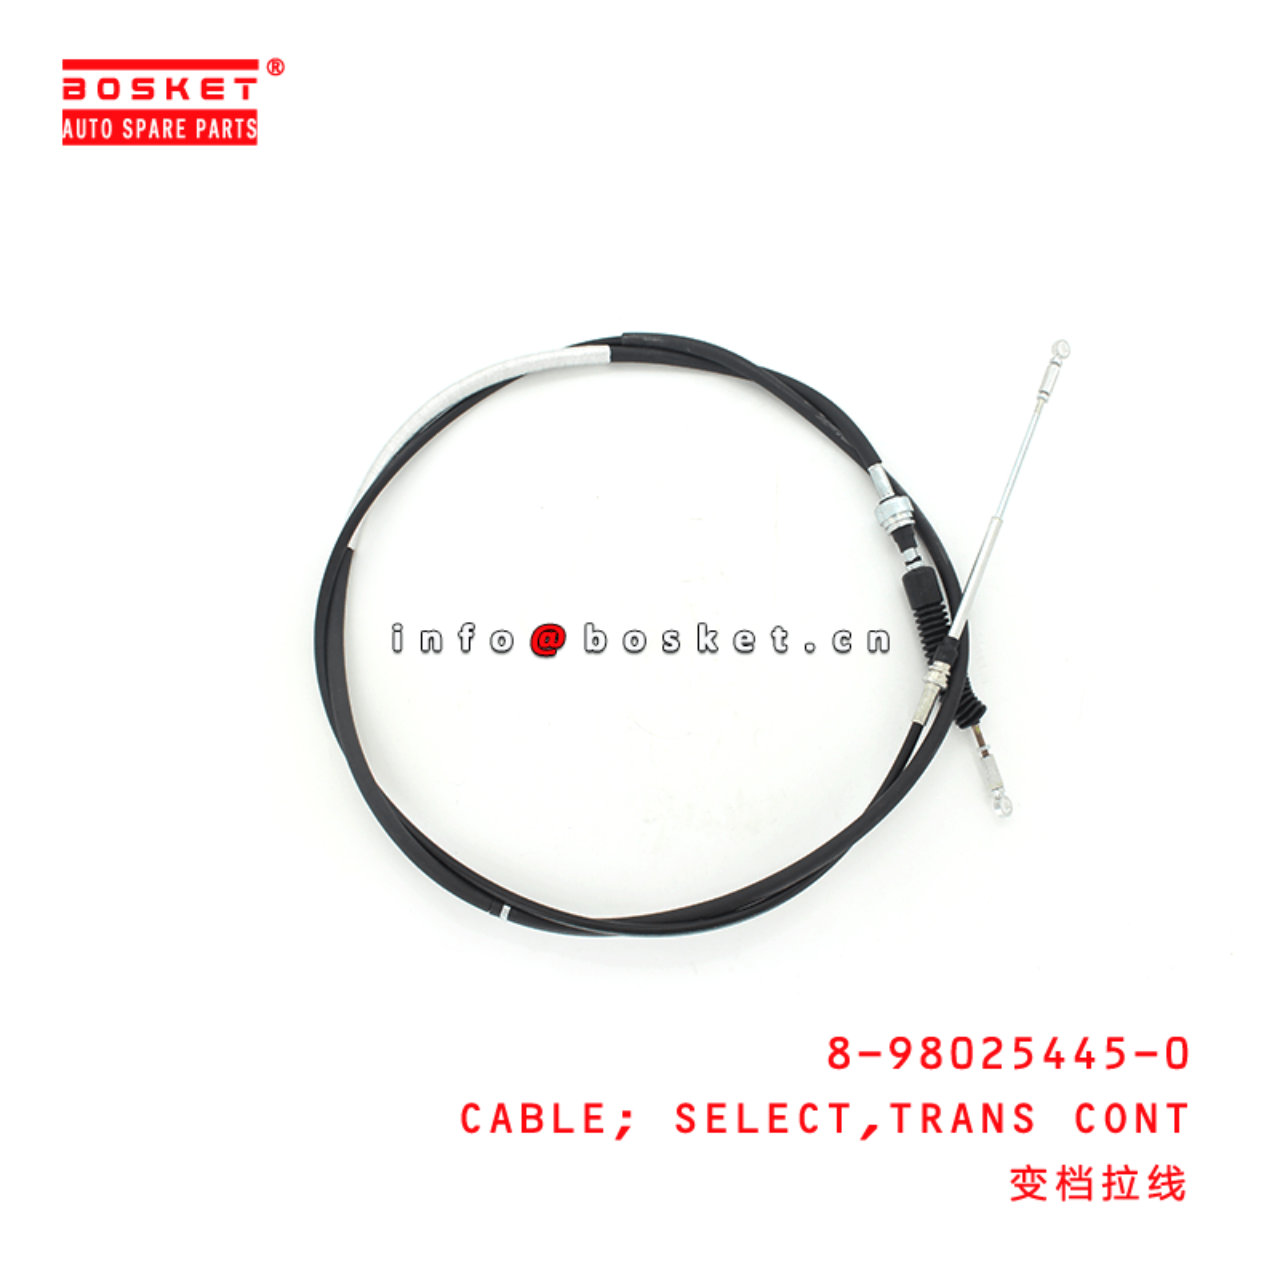 8-98025445-0 Transmission Control Select Cable 8980254450 Suitable for ISUZU 700P MYY5T